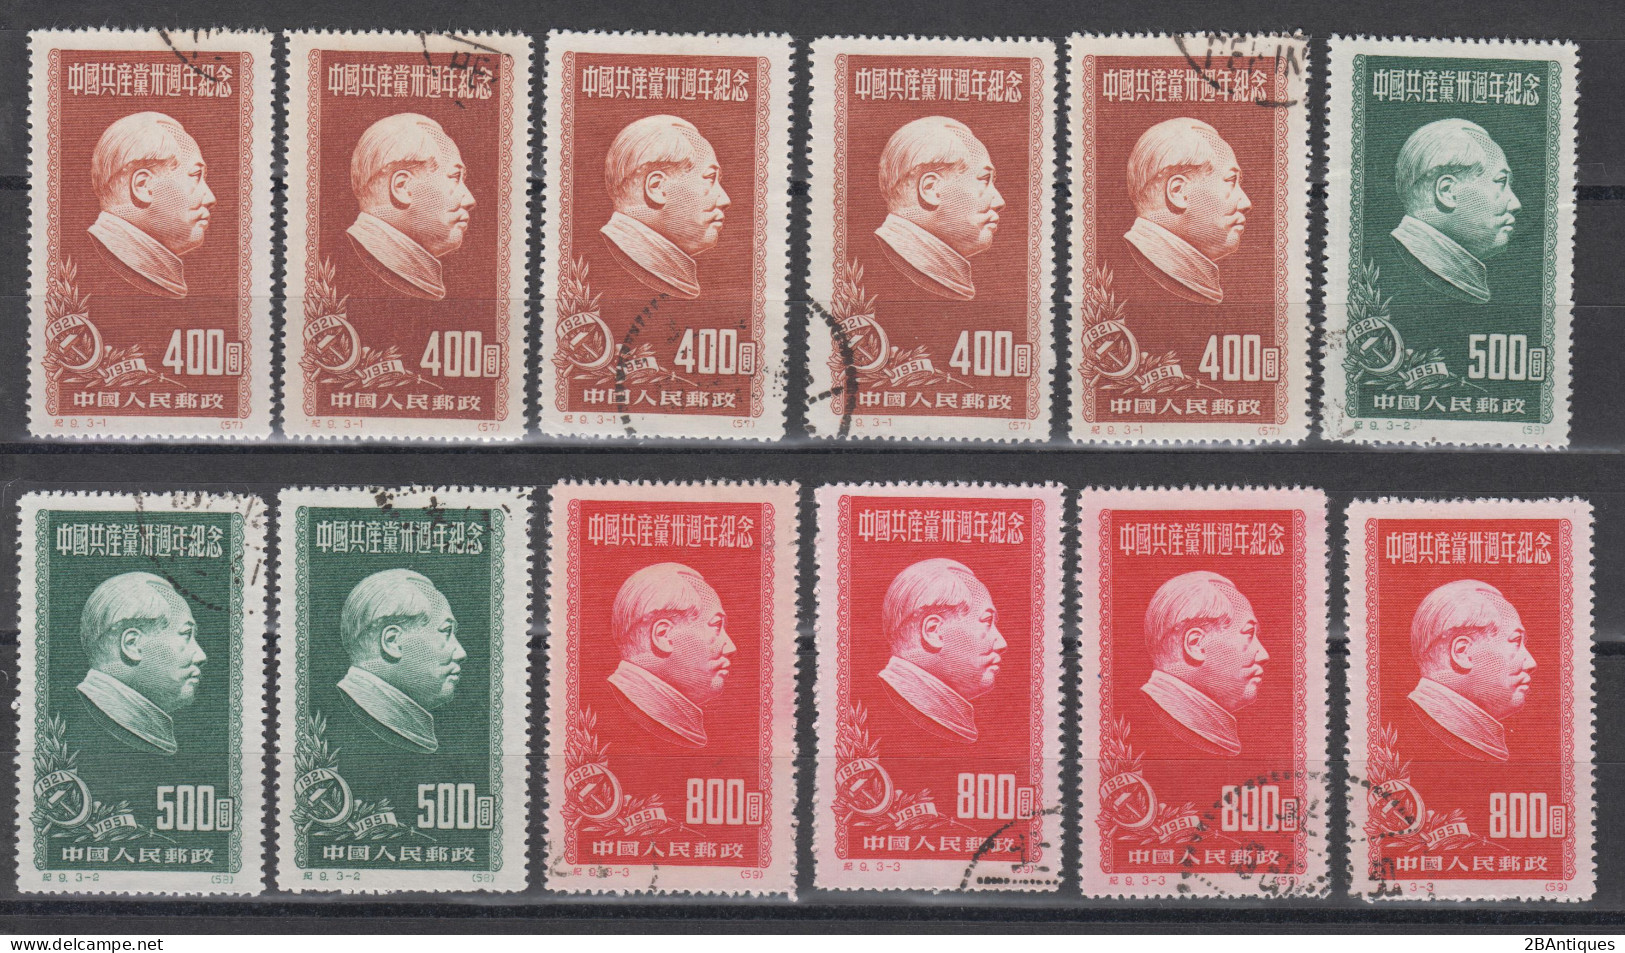 PR CHINA 1951 - The 30th Anniversary Of The Communist Party Of China - Mao Zedong CTO 12 Stamps - Gebraucht